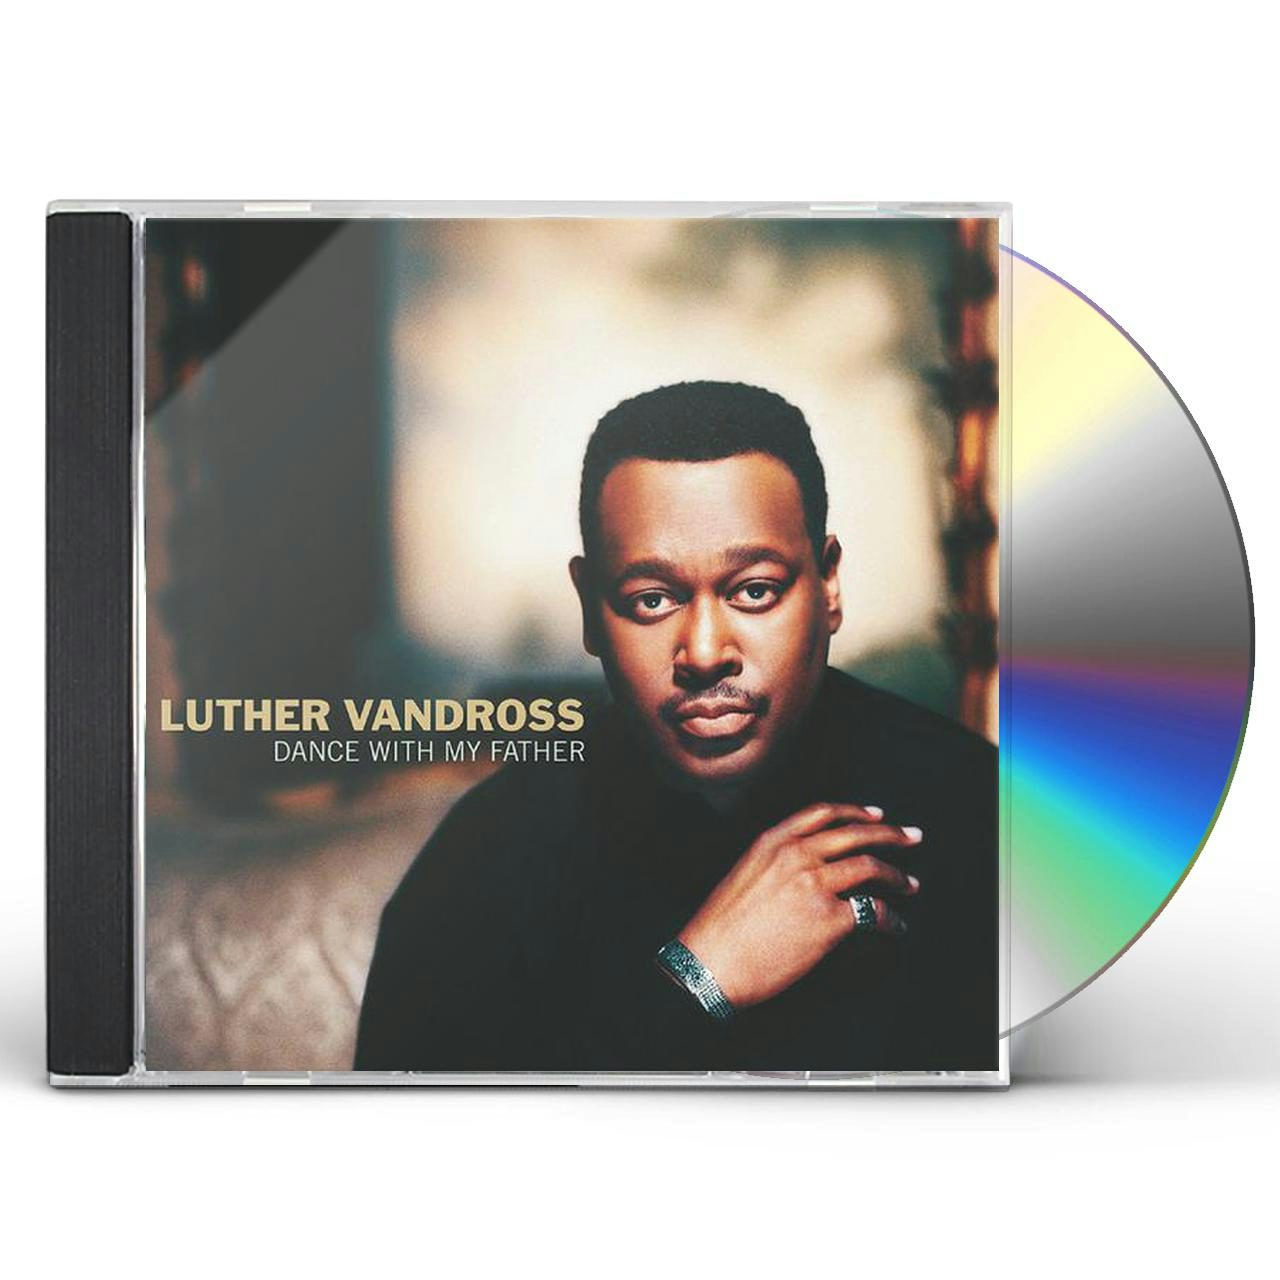 Luther Vandross DANCE WITH MY FATHER CD